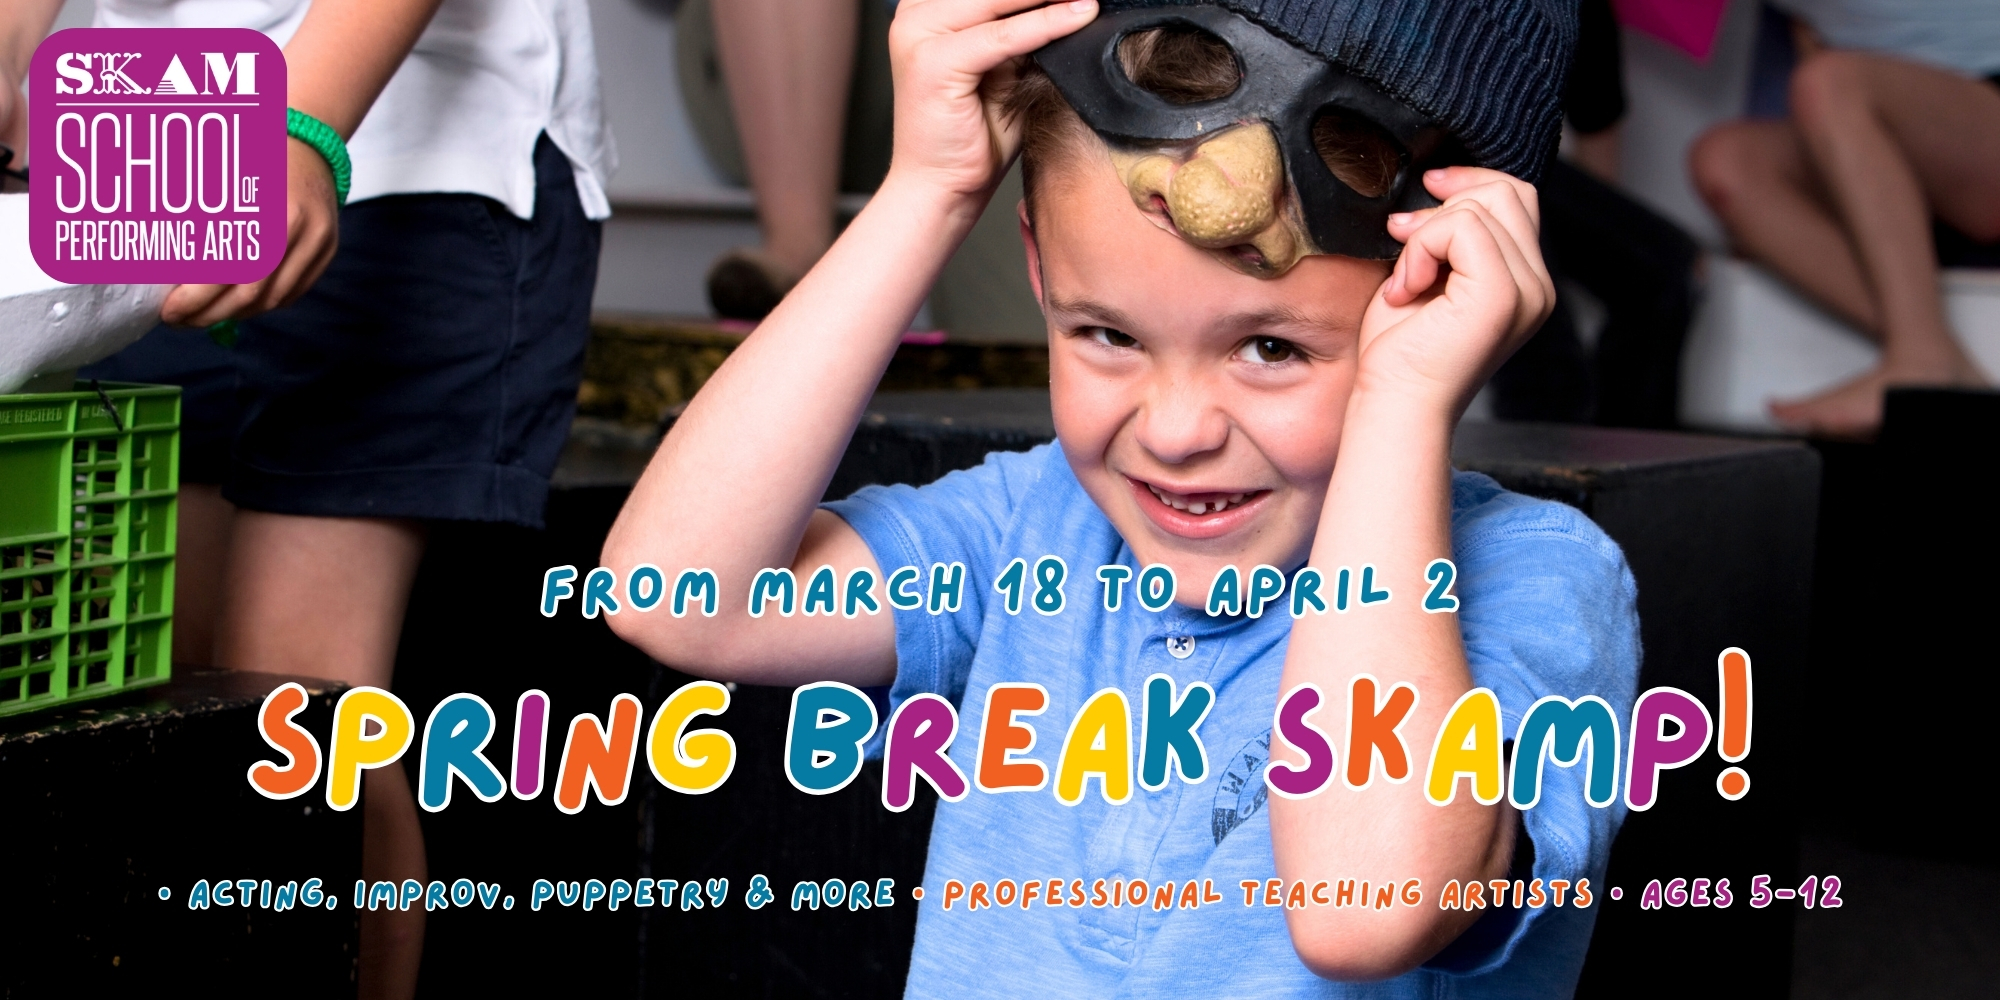 from March 18 to April 2; SPRING BREAK SKAMp! • Acting, improv, film & more • Professional teaching artists • Ages 5-10 /